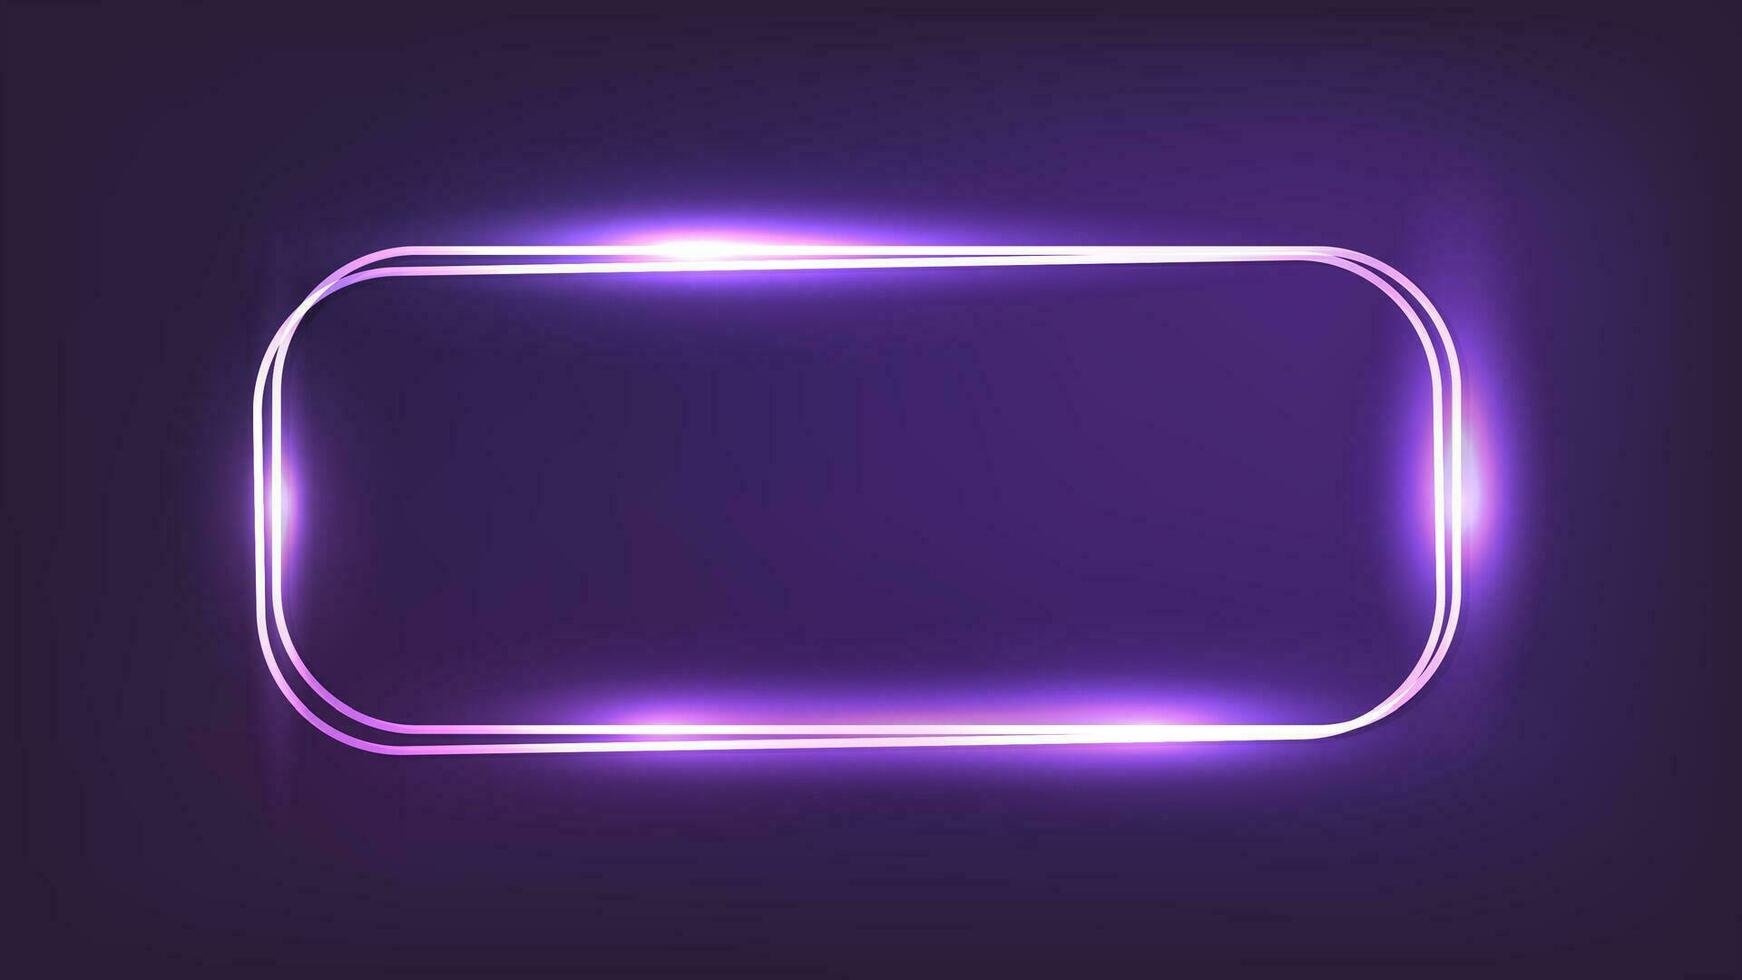 Neon double rounded rectangular frame vector